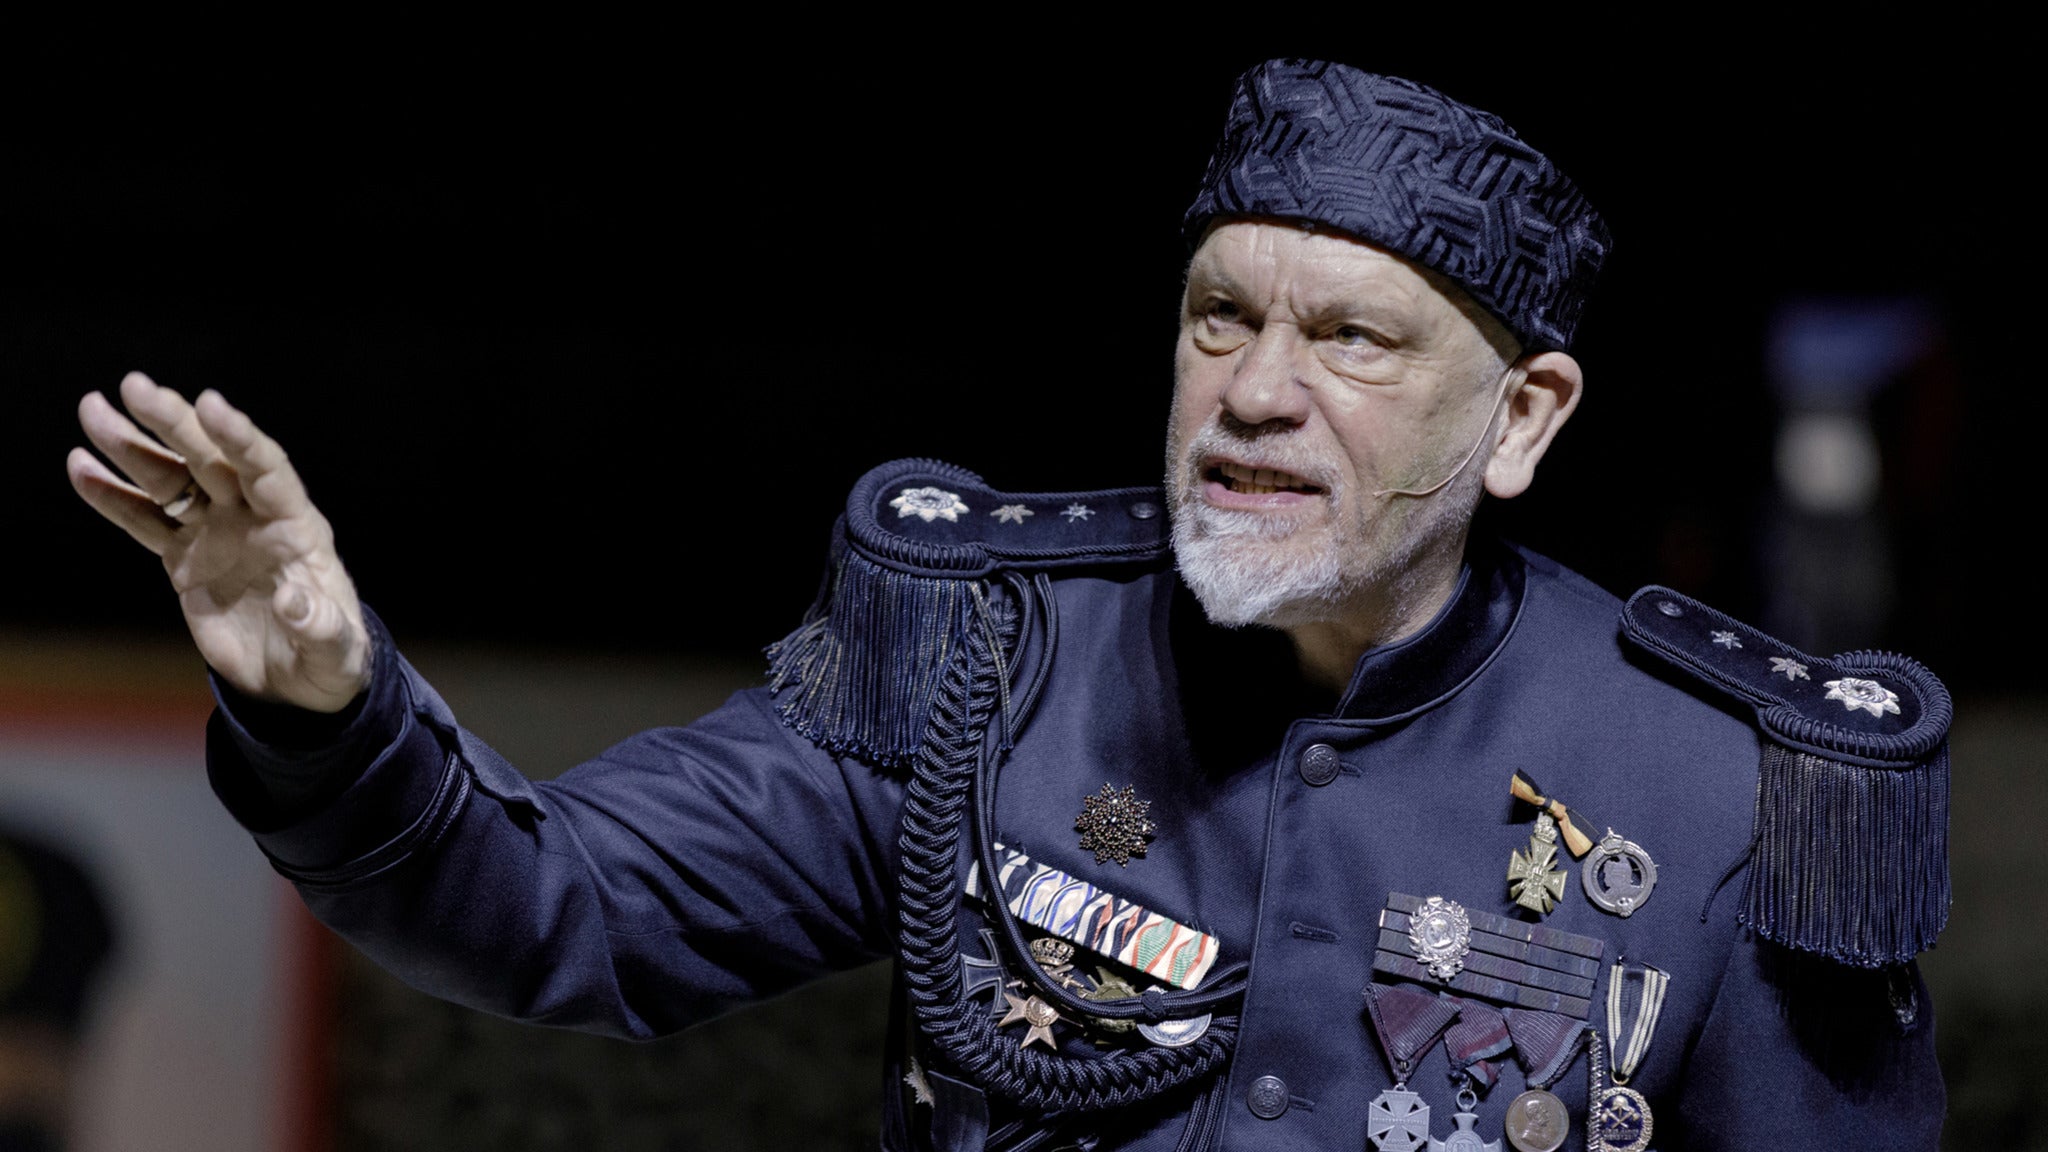 John Malkovich in The Music Critic, written by Aleksey Igudesman presale code for show tickets in New York, NY (Beacon Theatre)